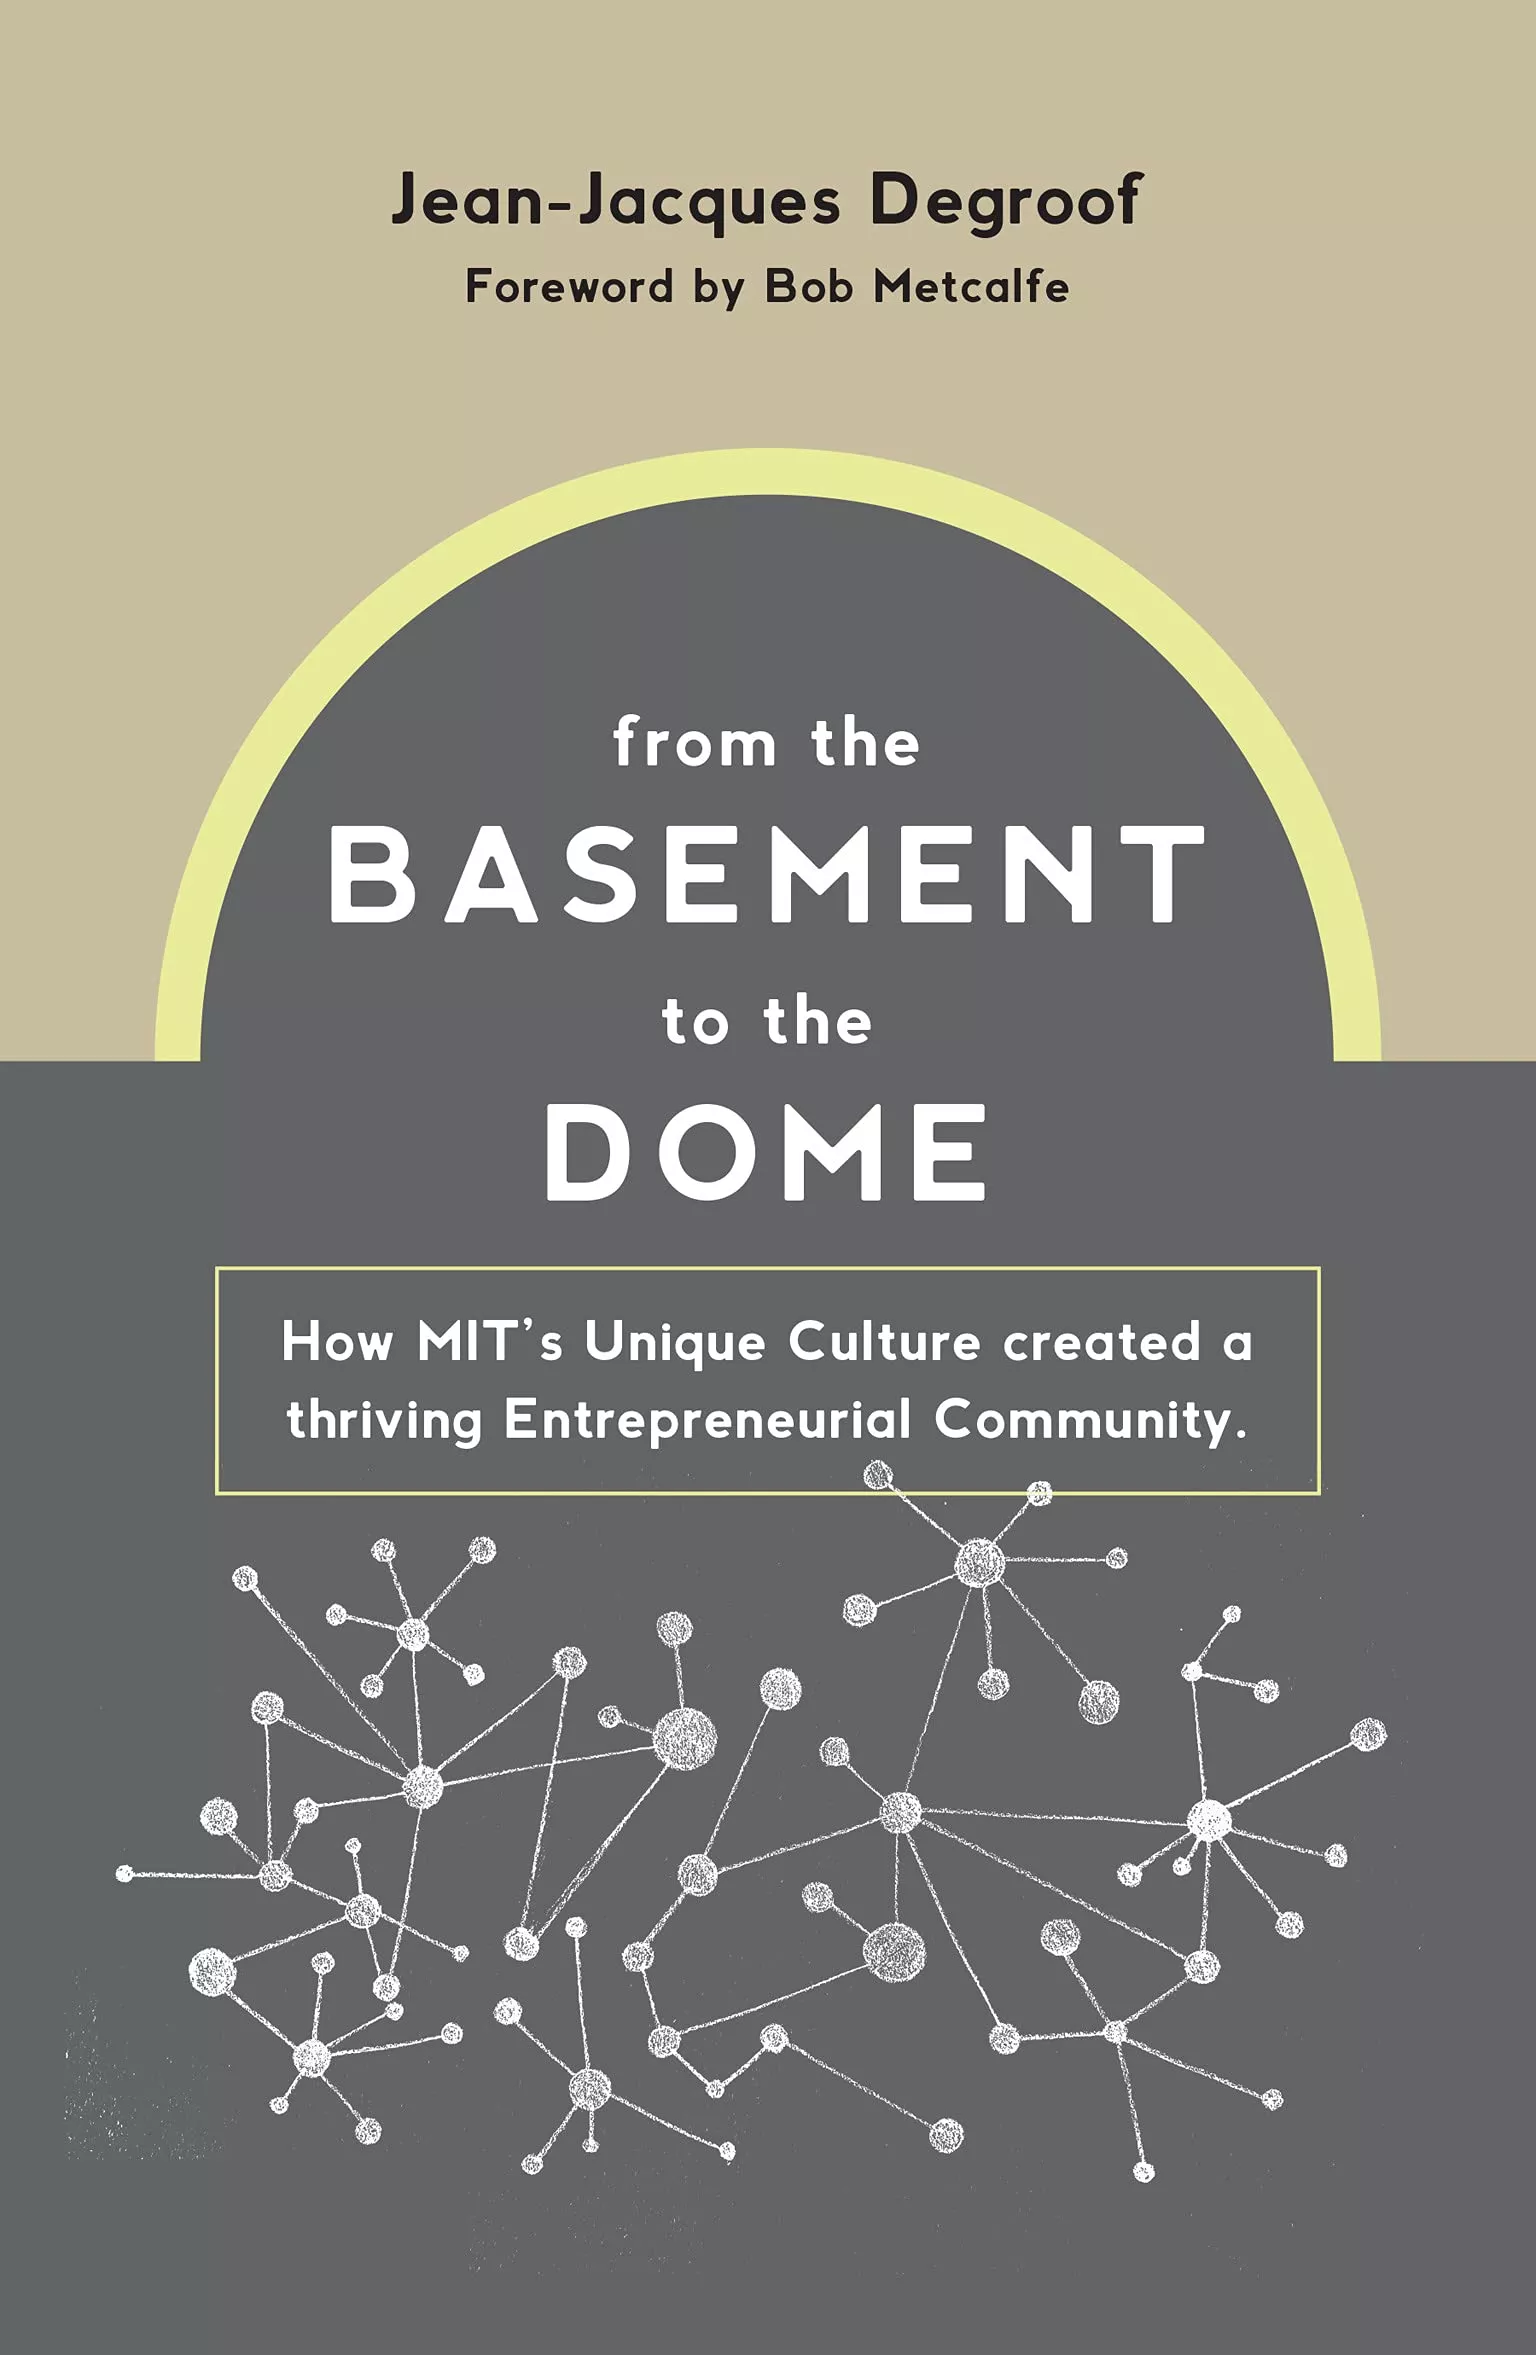 From the Basement to the Dome – How MIT’s Unique Culture Created a Thriving Entrepreneurial Community